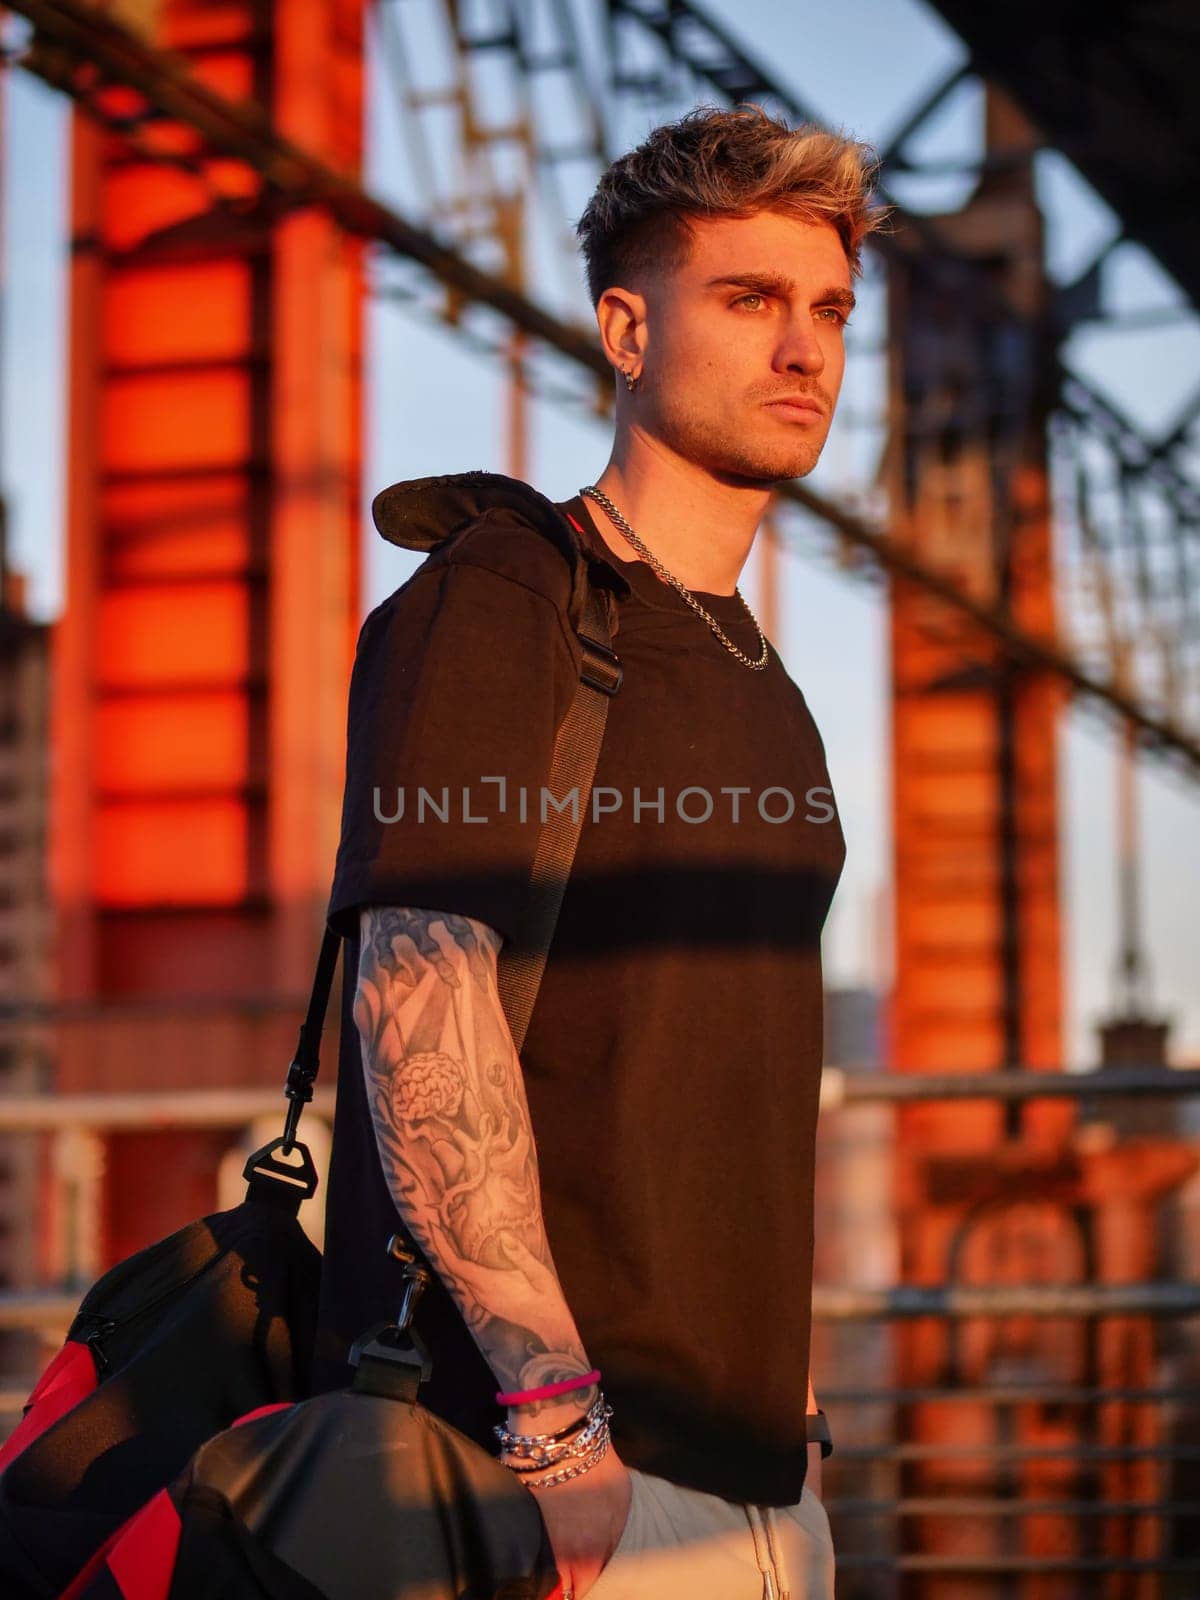 A man with a visible tattoo on his arm stands confidently in front of a modern building. He gazes ahead, creating a striking contrast between his edgy appearance and the sleek architectural backdrop.